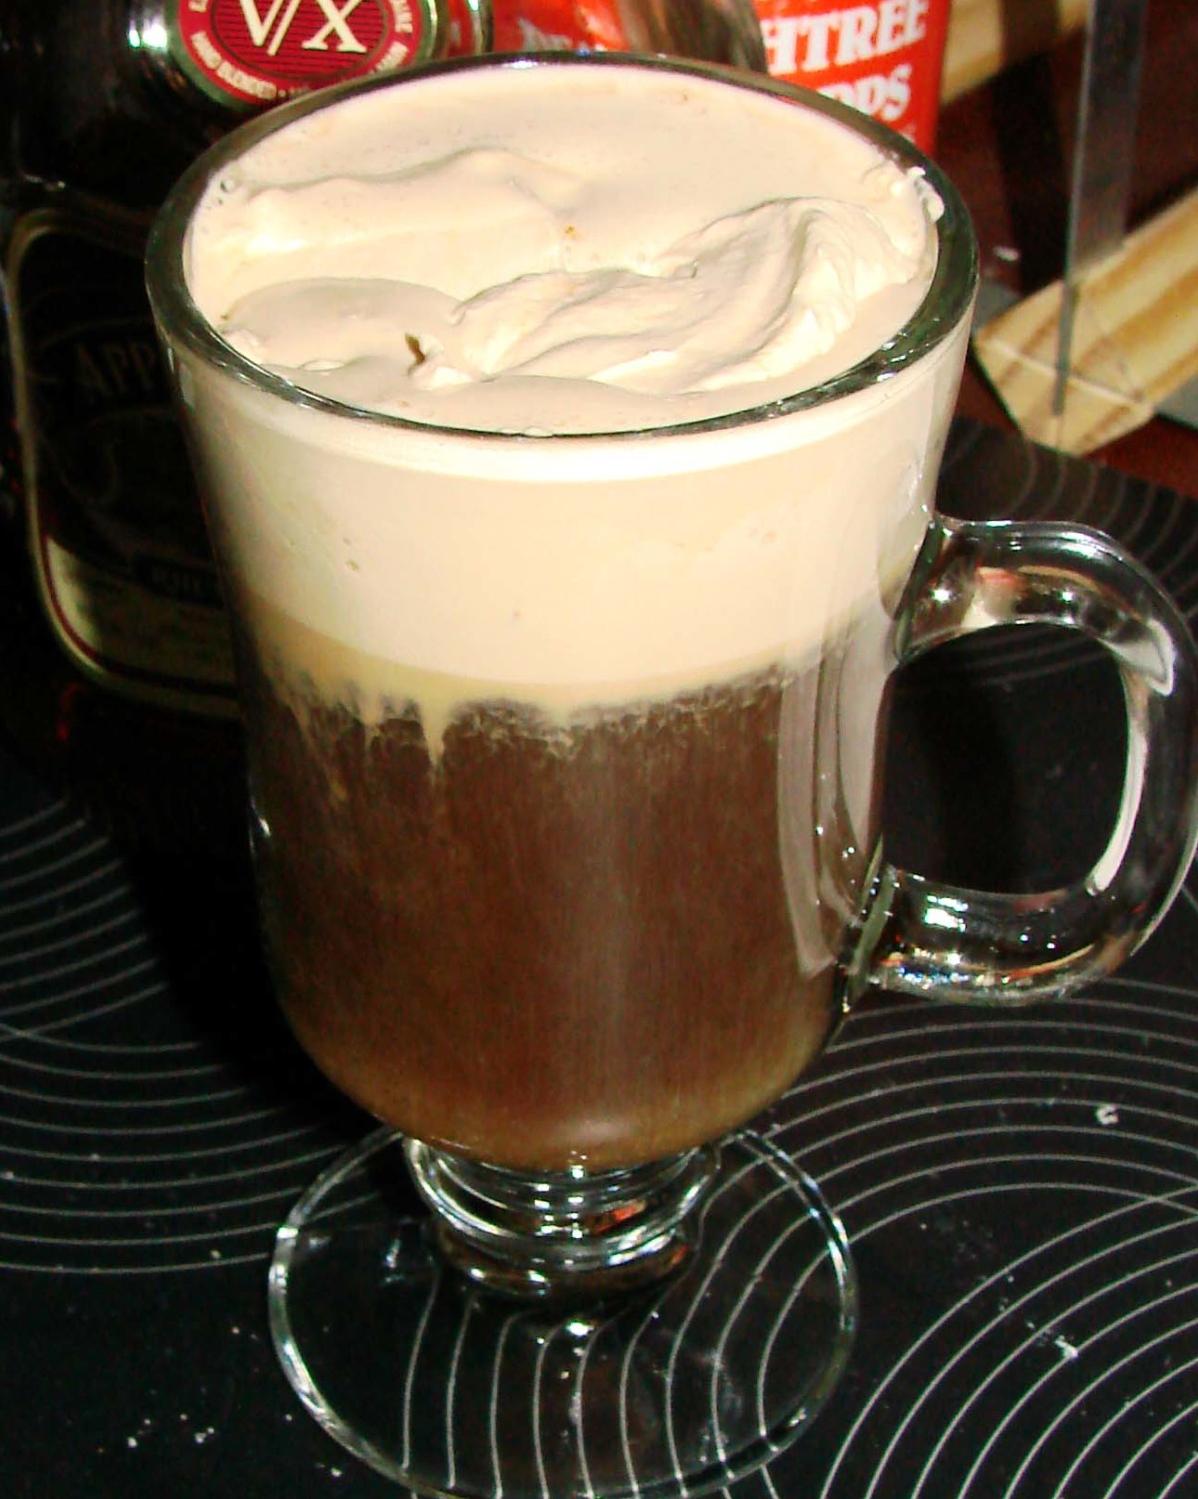  Satisfy your cravings with this decadent Chocolate Rum Espresso Whipped Cream!